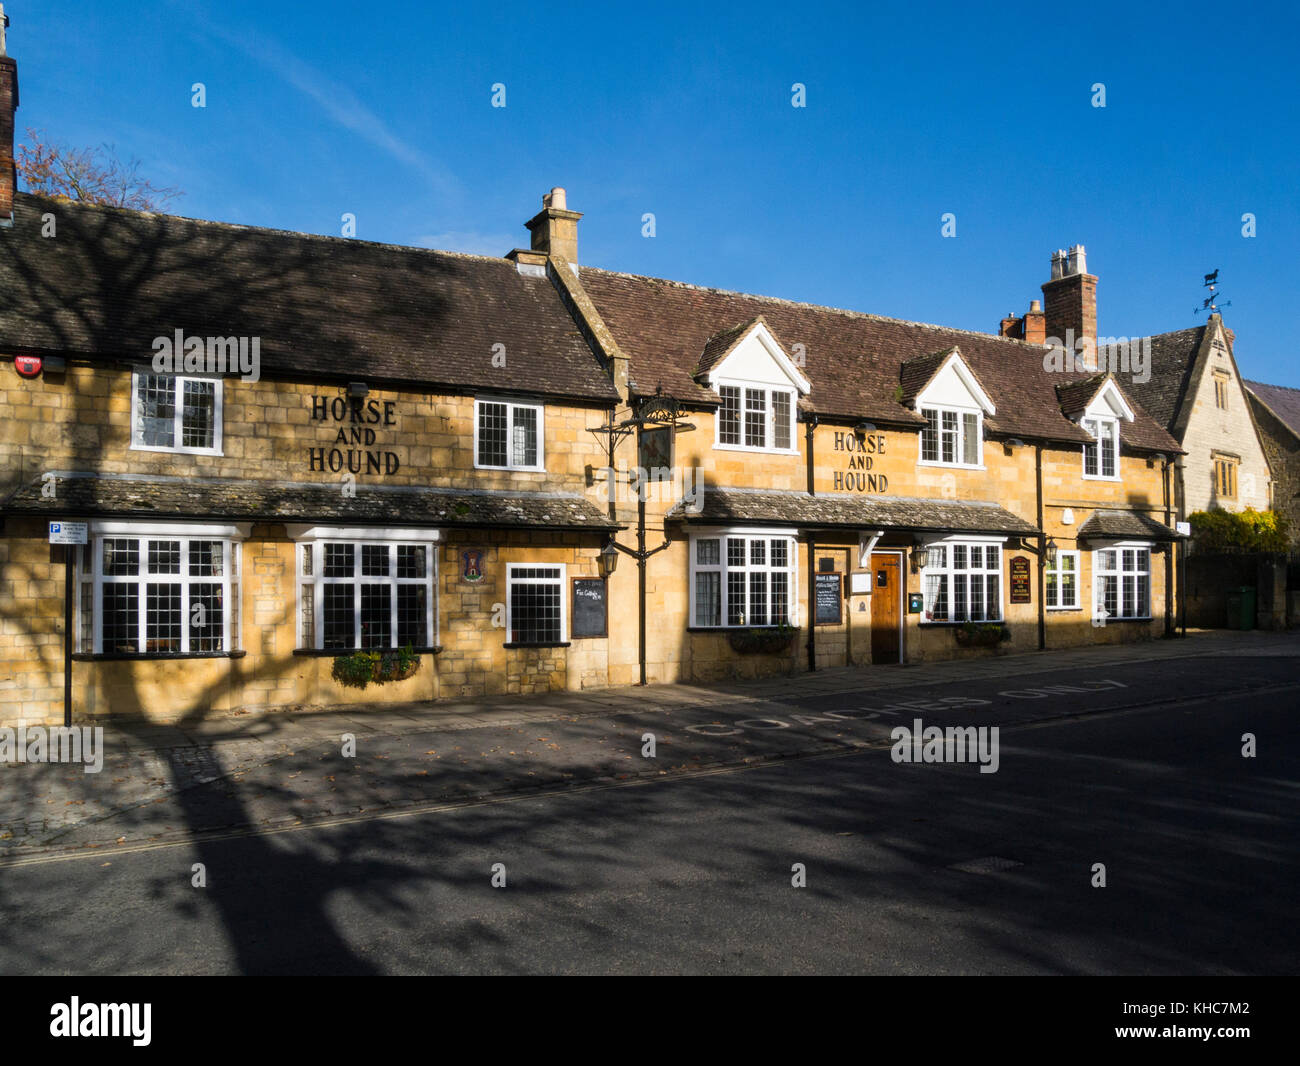 Horse And Hounds Inn High Street Broadway A Picture Postcard